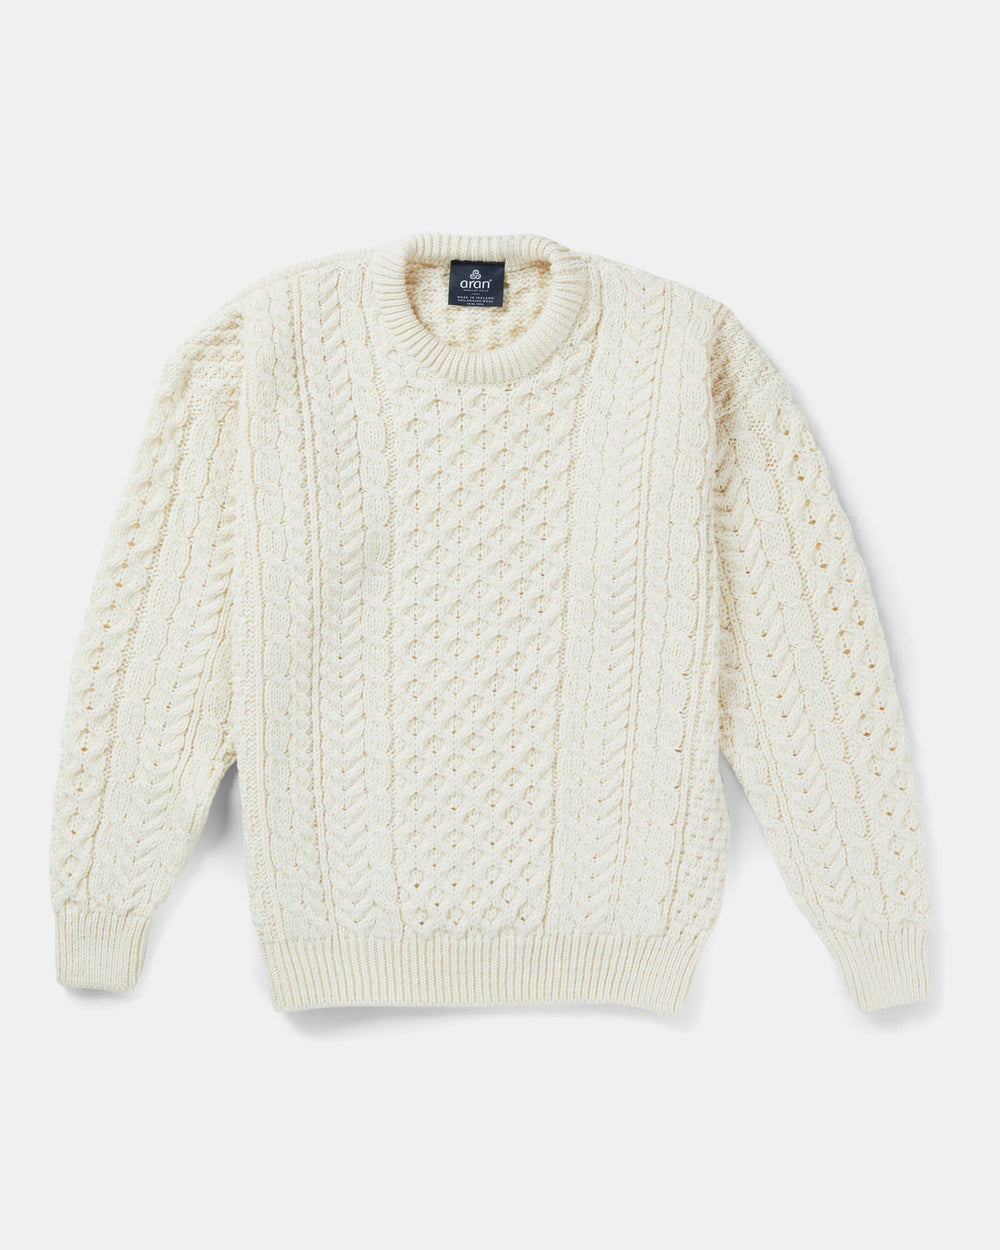 Aran Wool Merino Traditional Pullover Sweater White (A823 162)